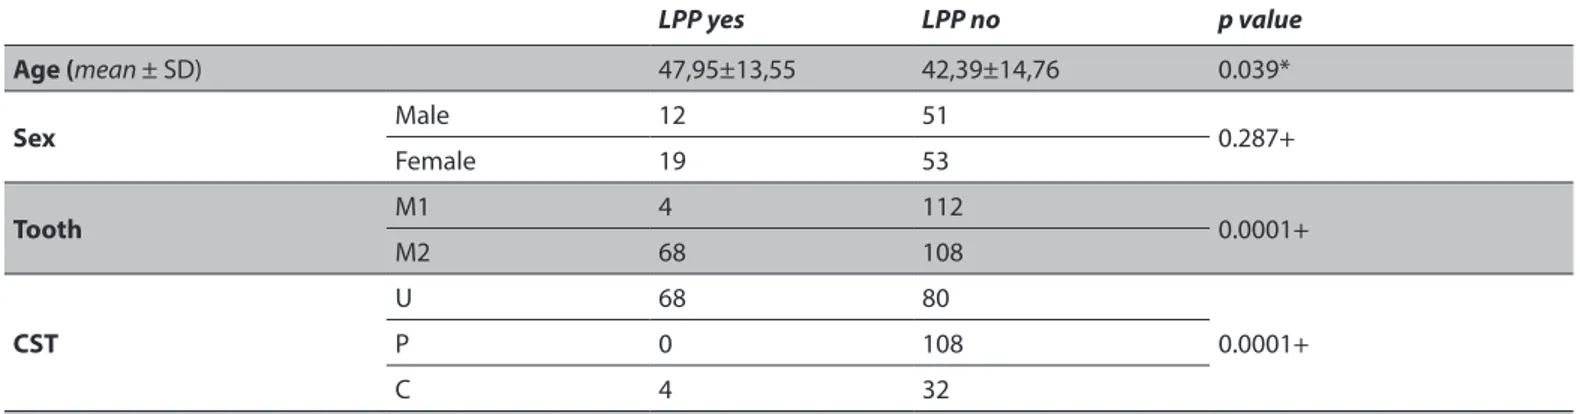 Table 1. Frequency distribution of lingual plate perforation of each tooth type, sex and cross section type (*independent t-test, +Chi square test)